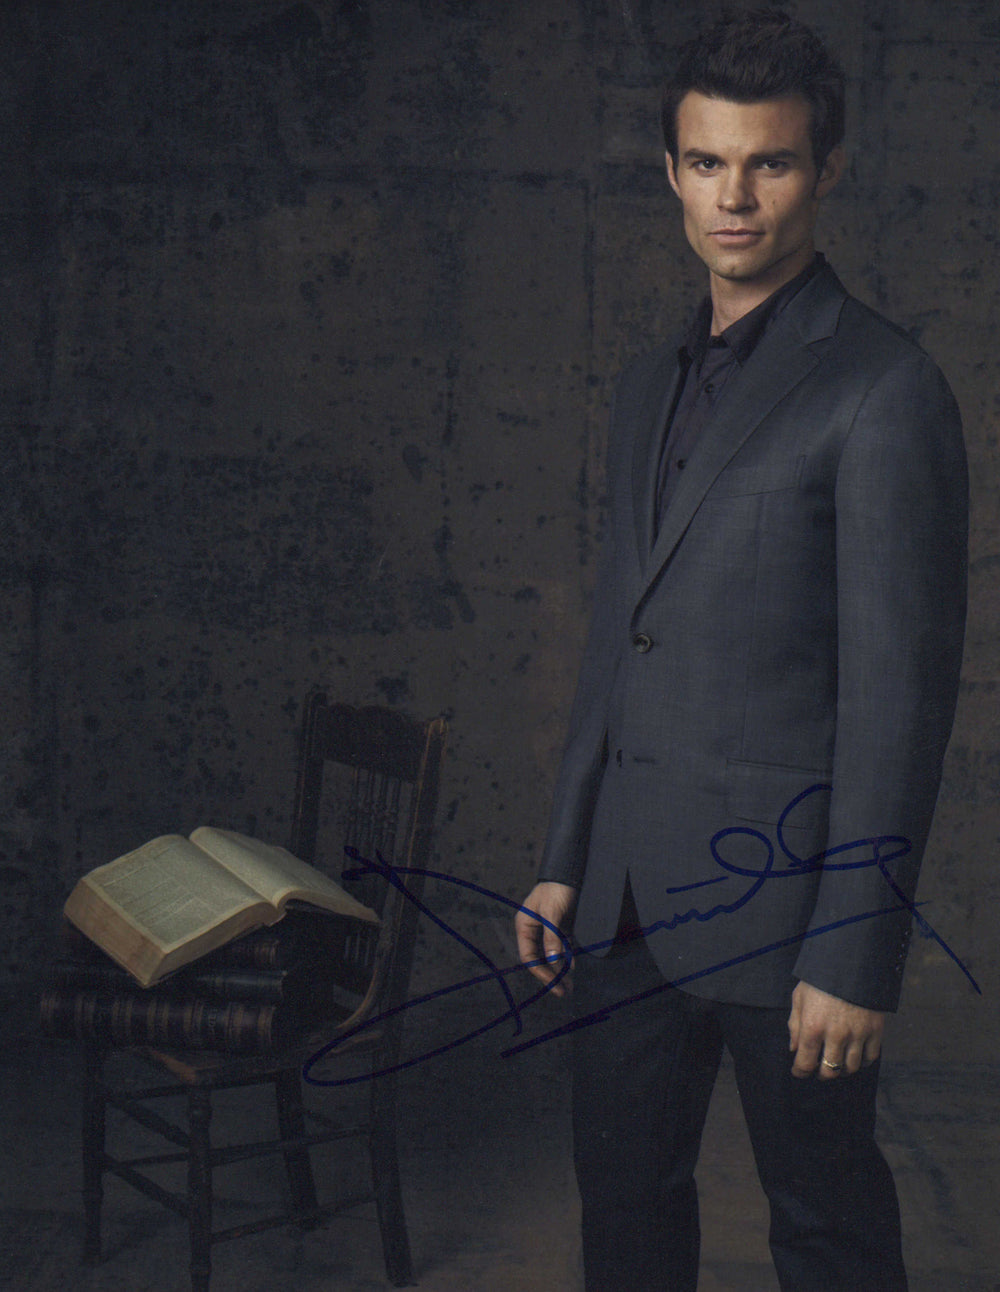 Daniel Gillies as Elijah Mikaelson in The Vampire Diaries Signed 11x14 Photo